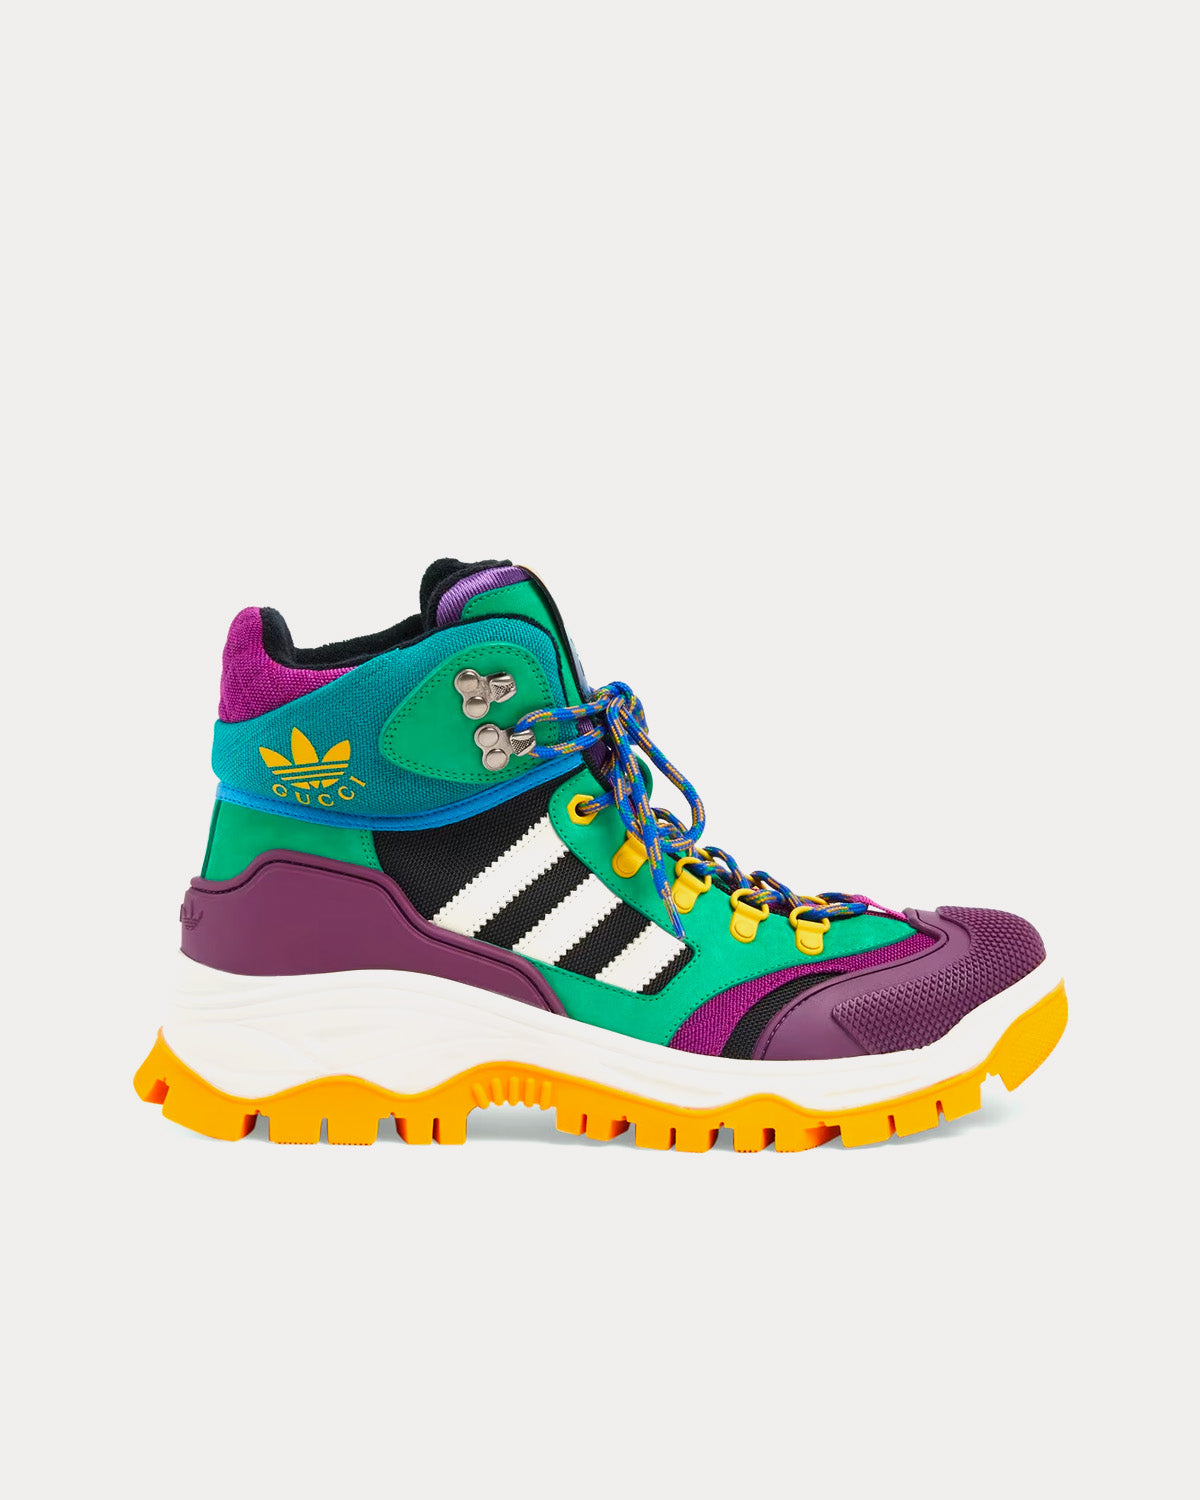 Adidas x Gucci - Lace-Up Purple / Green High Top Sneakers